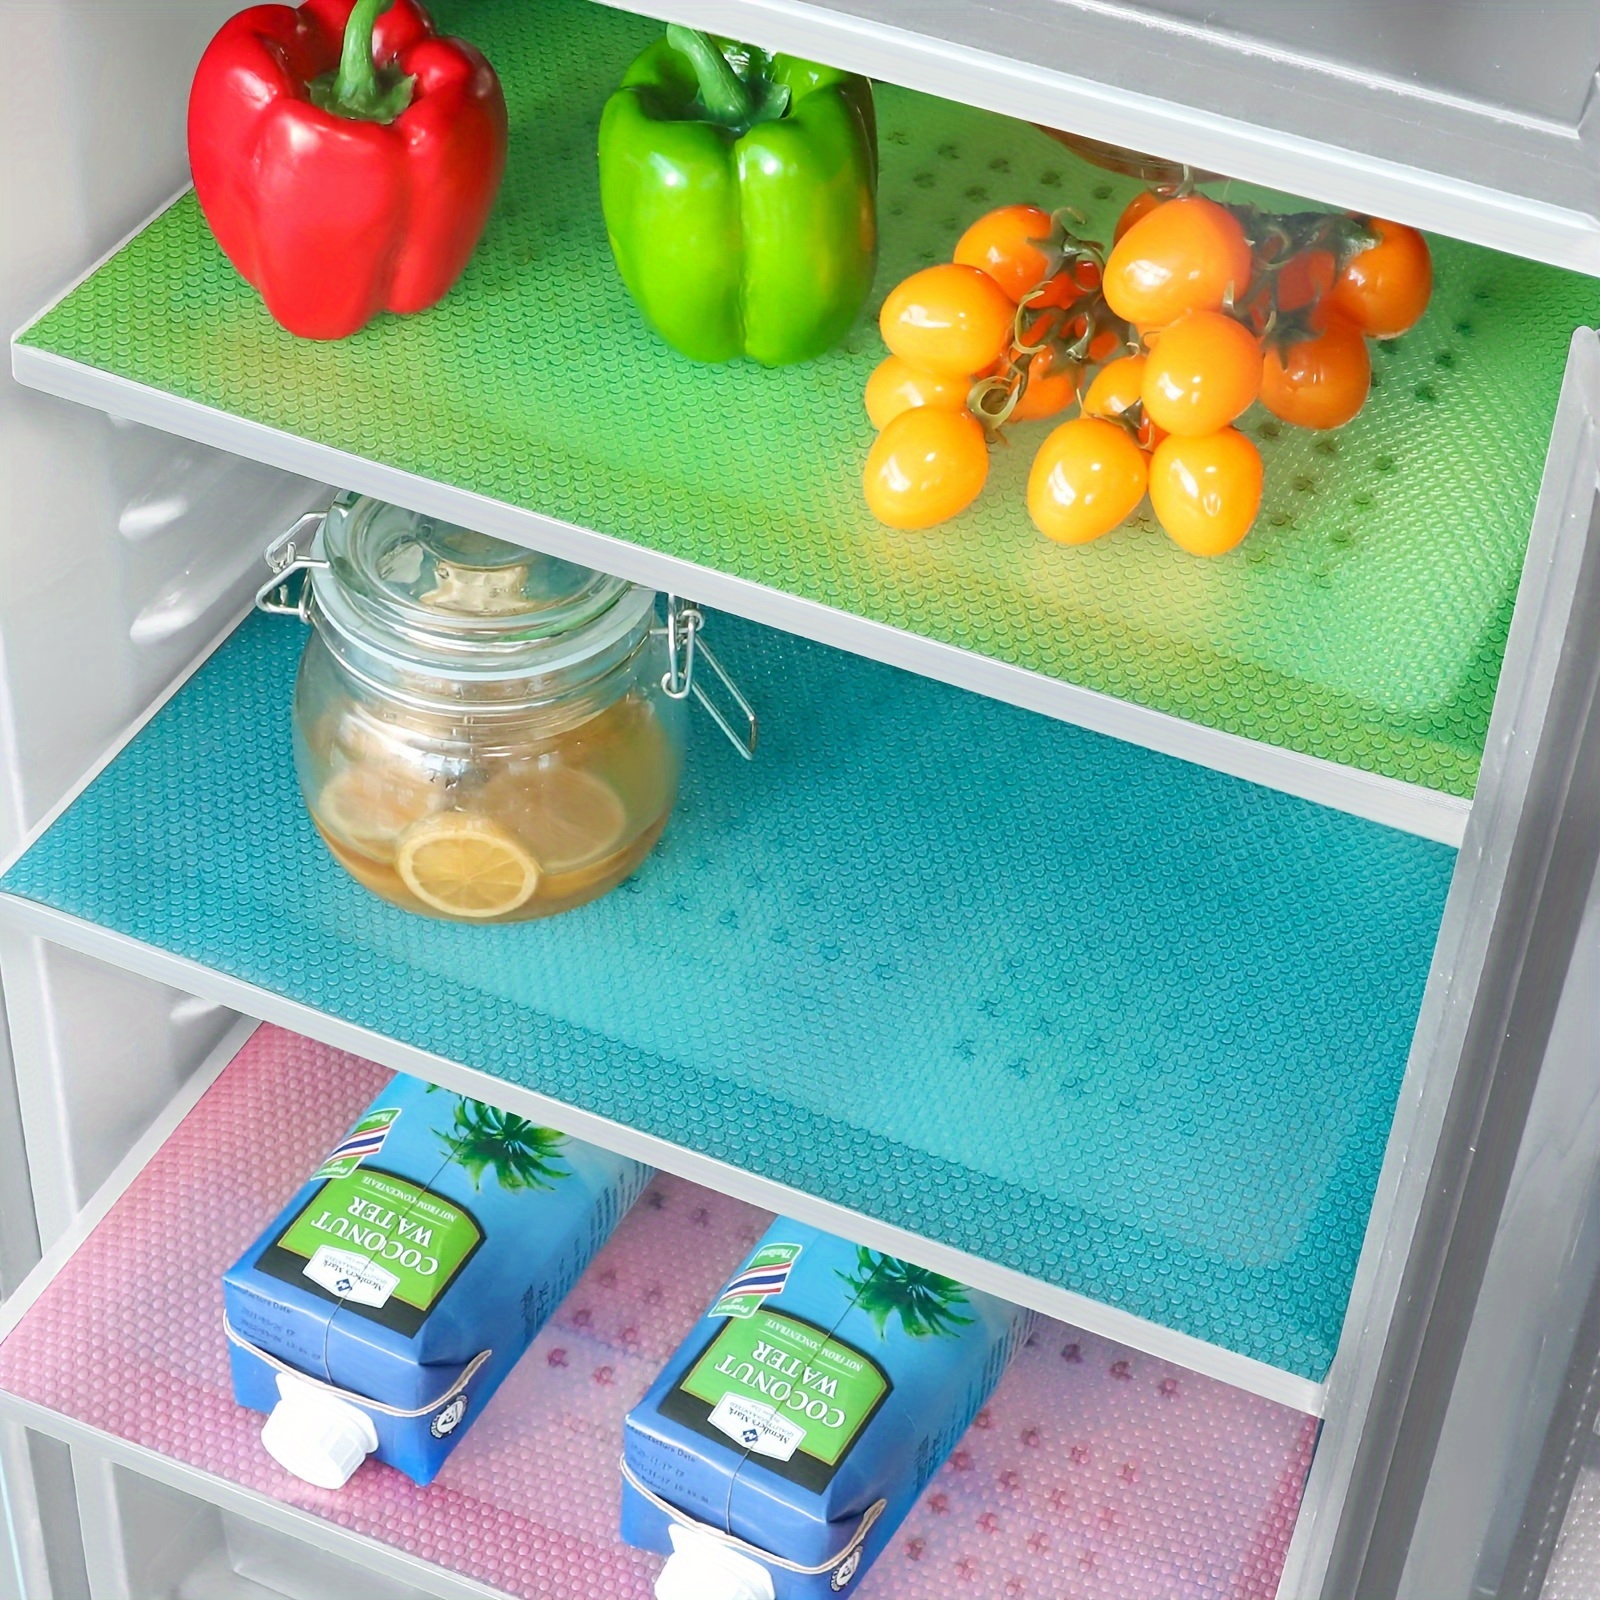 

4/6pcs Refrigerator Liners, Washable Refrigerator Shelf Liners, Home Kitchen Gadgets Accessories, Organization For Top Freezer, Glass Shelf Wire Shelving Cupboard Cabinet Drawers